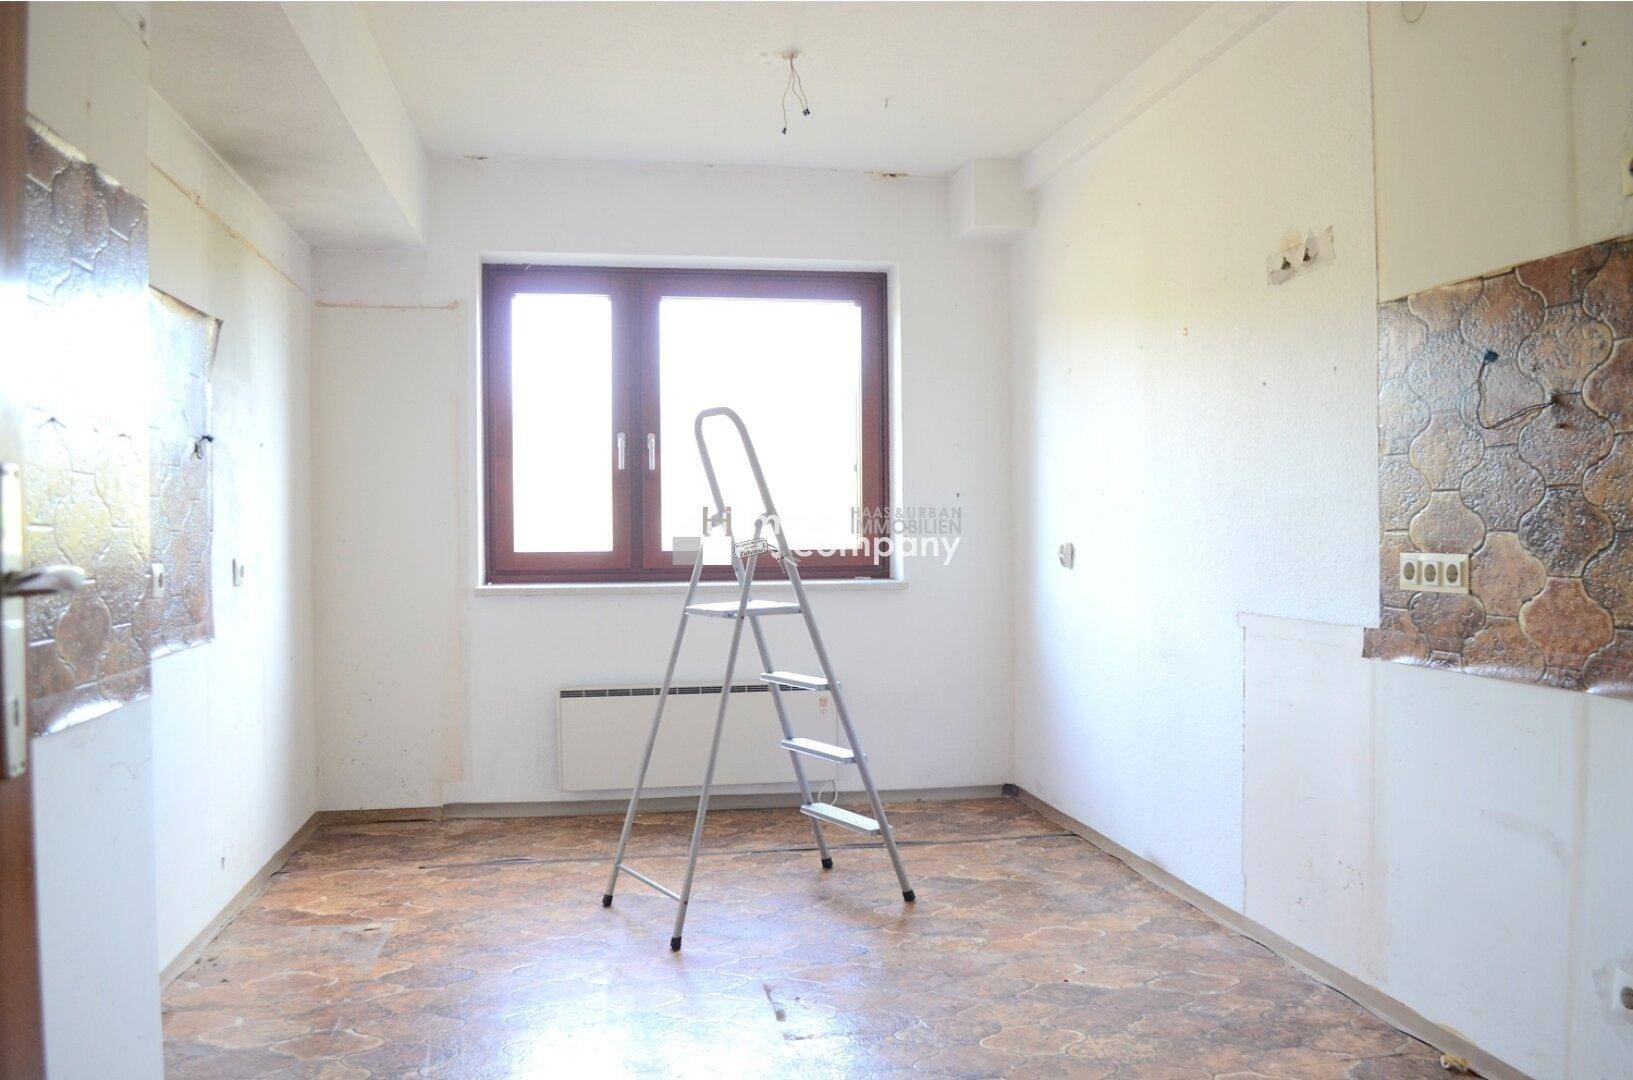 https://pictures.immobilienscout24.de/prod.www.immobilienscout24.at/pictureserver/loadPicture?q=70&id=012.0012000001E3r00-1713447068-e19daa5a78c64bf8beaf2f7a34dab9bf